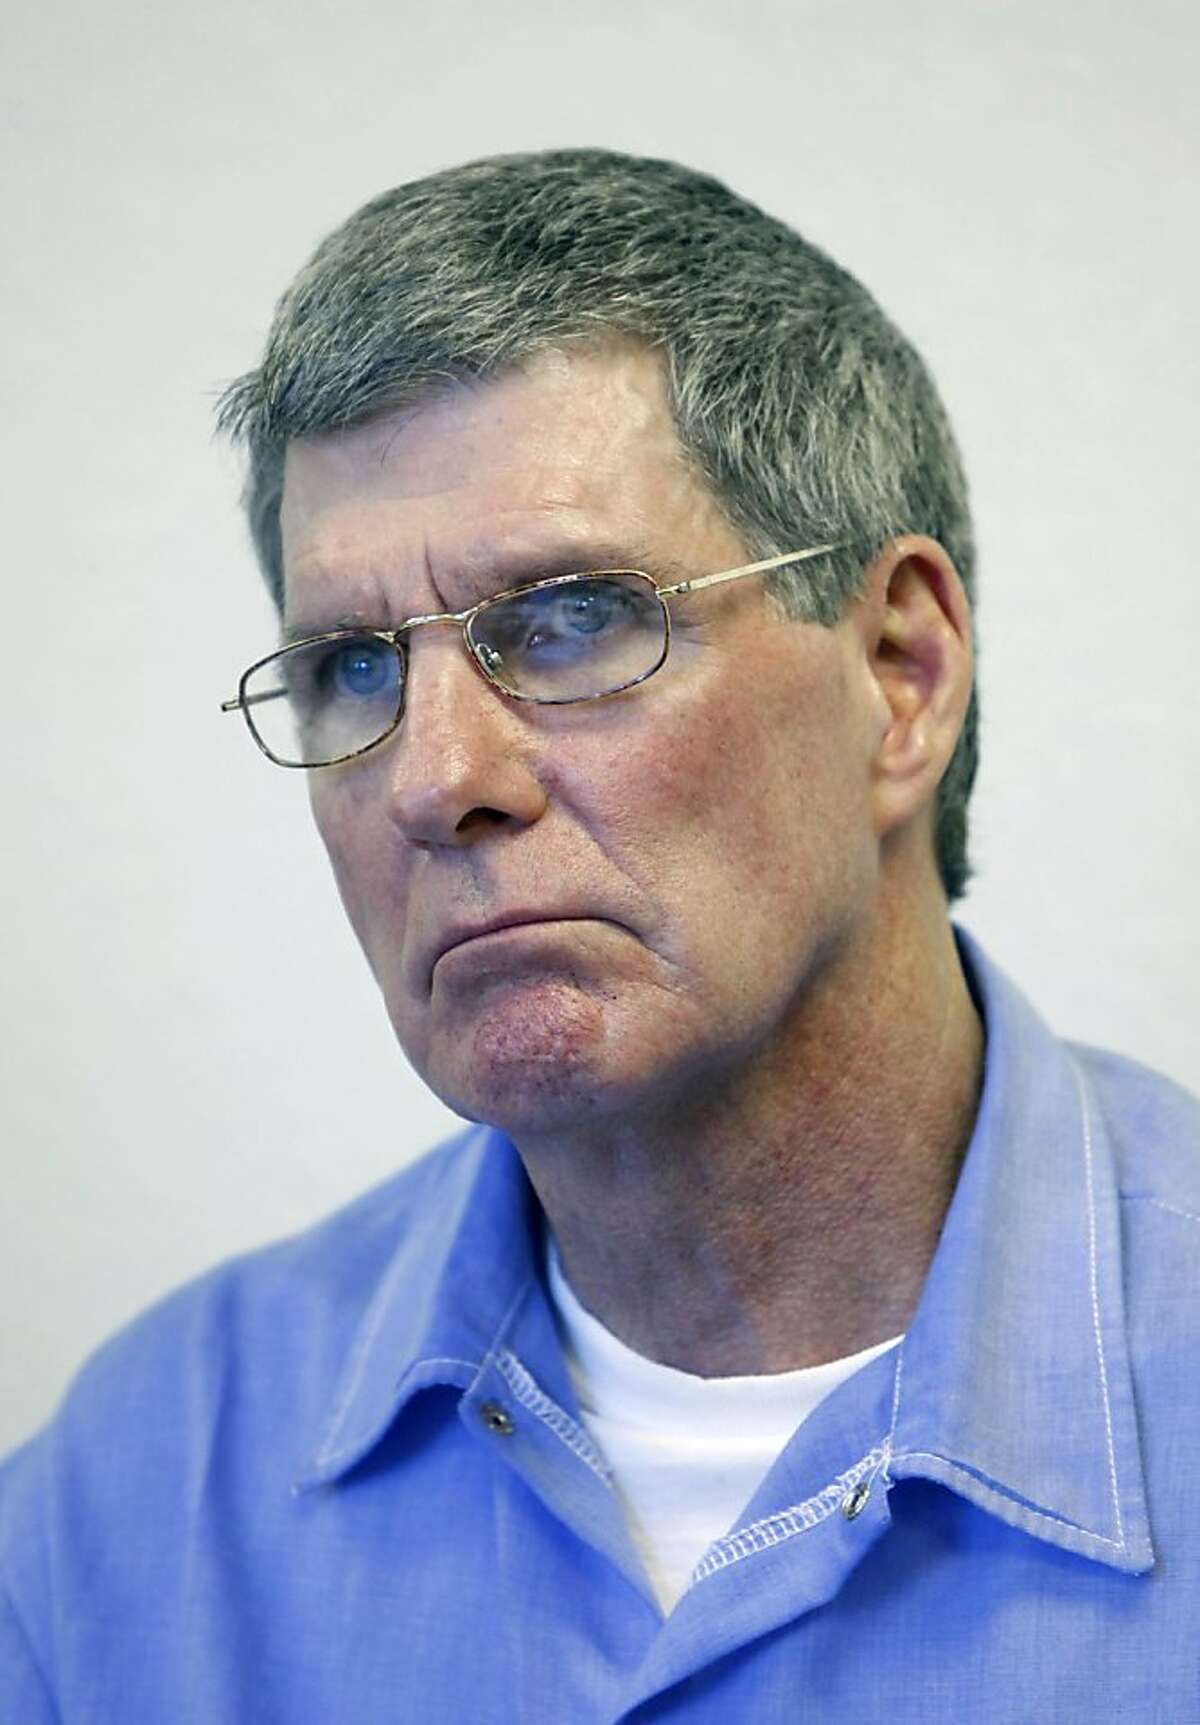 Charles "Tex" Watson - Getting his nickname after being born in Farmersville, Texas on Dec. 2, 1945, Watson was denied parole in October of 2016. Watson, 71, is serving life in prison at Mule Creek State Prison in Ione, Calif., approximately 40 miles outside of Sacramento.  Source: Los Angeles Times